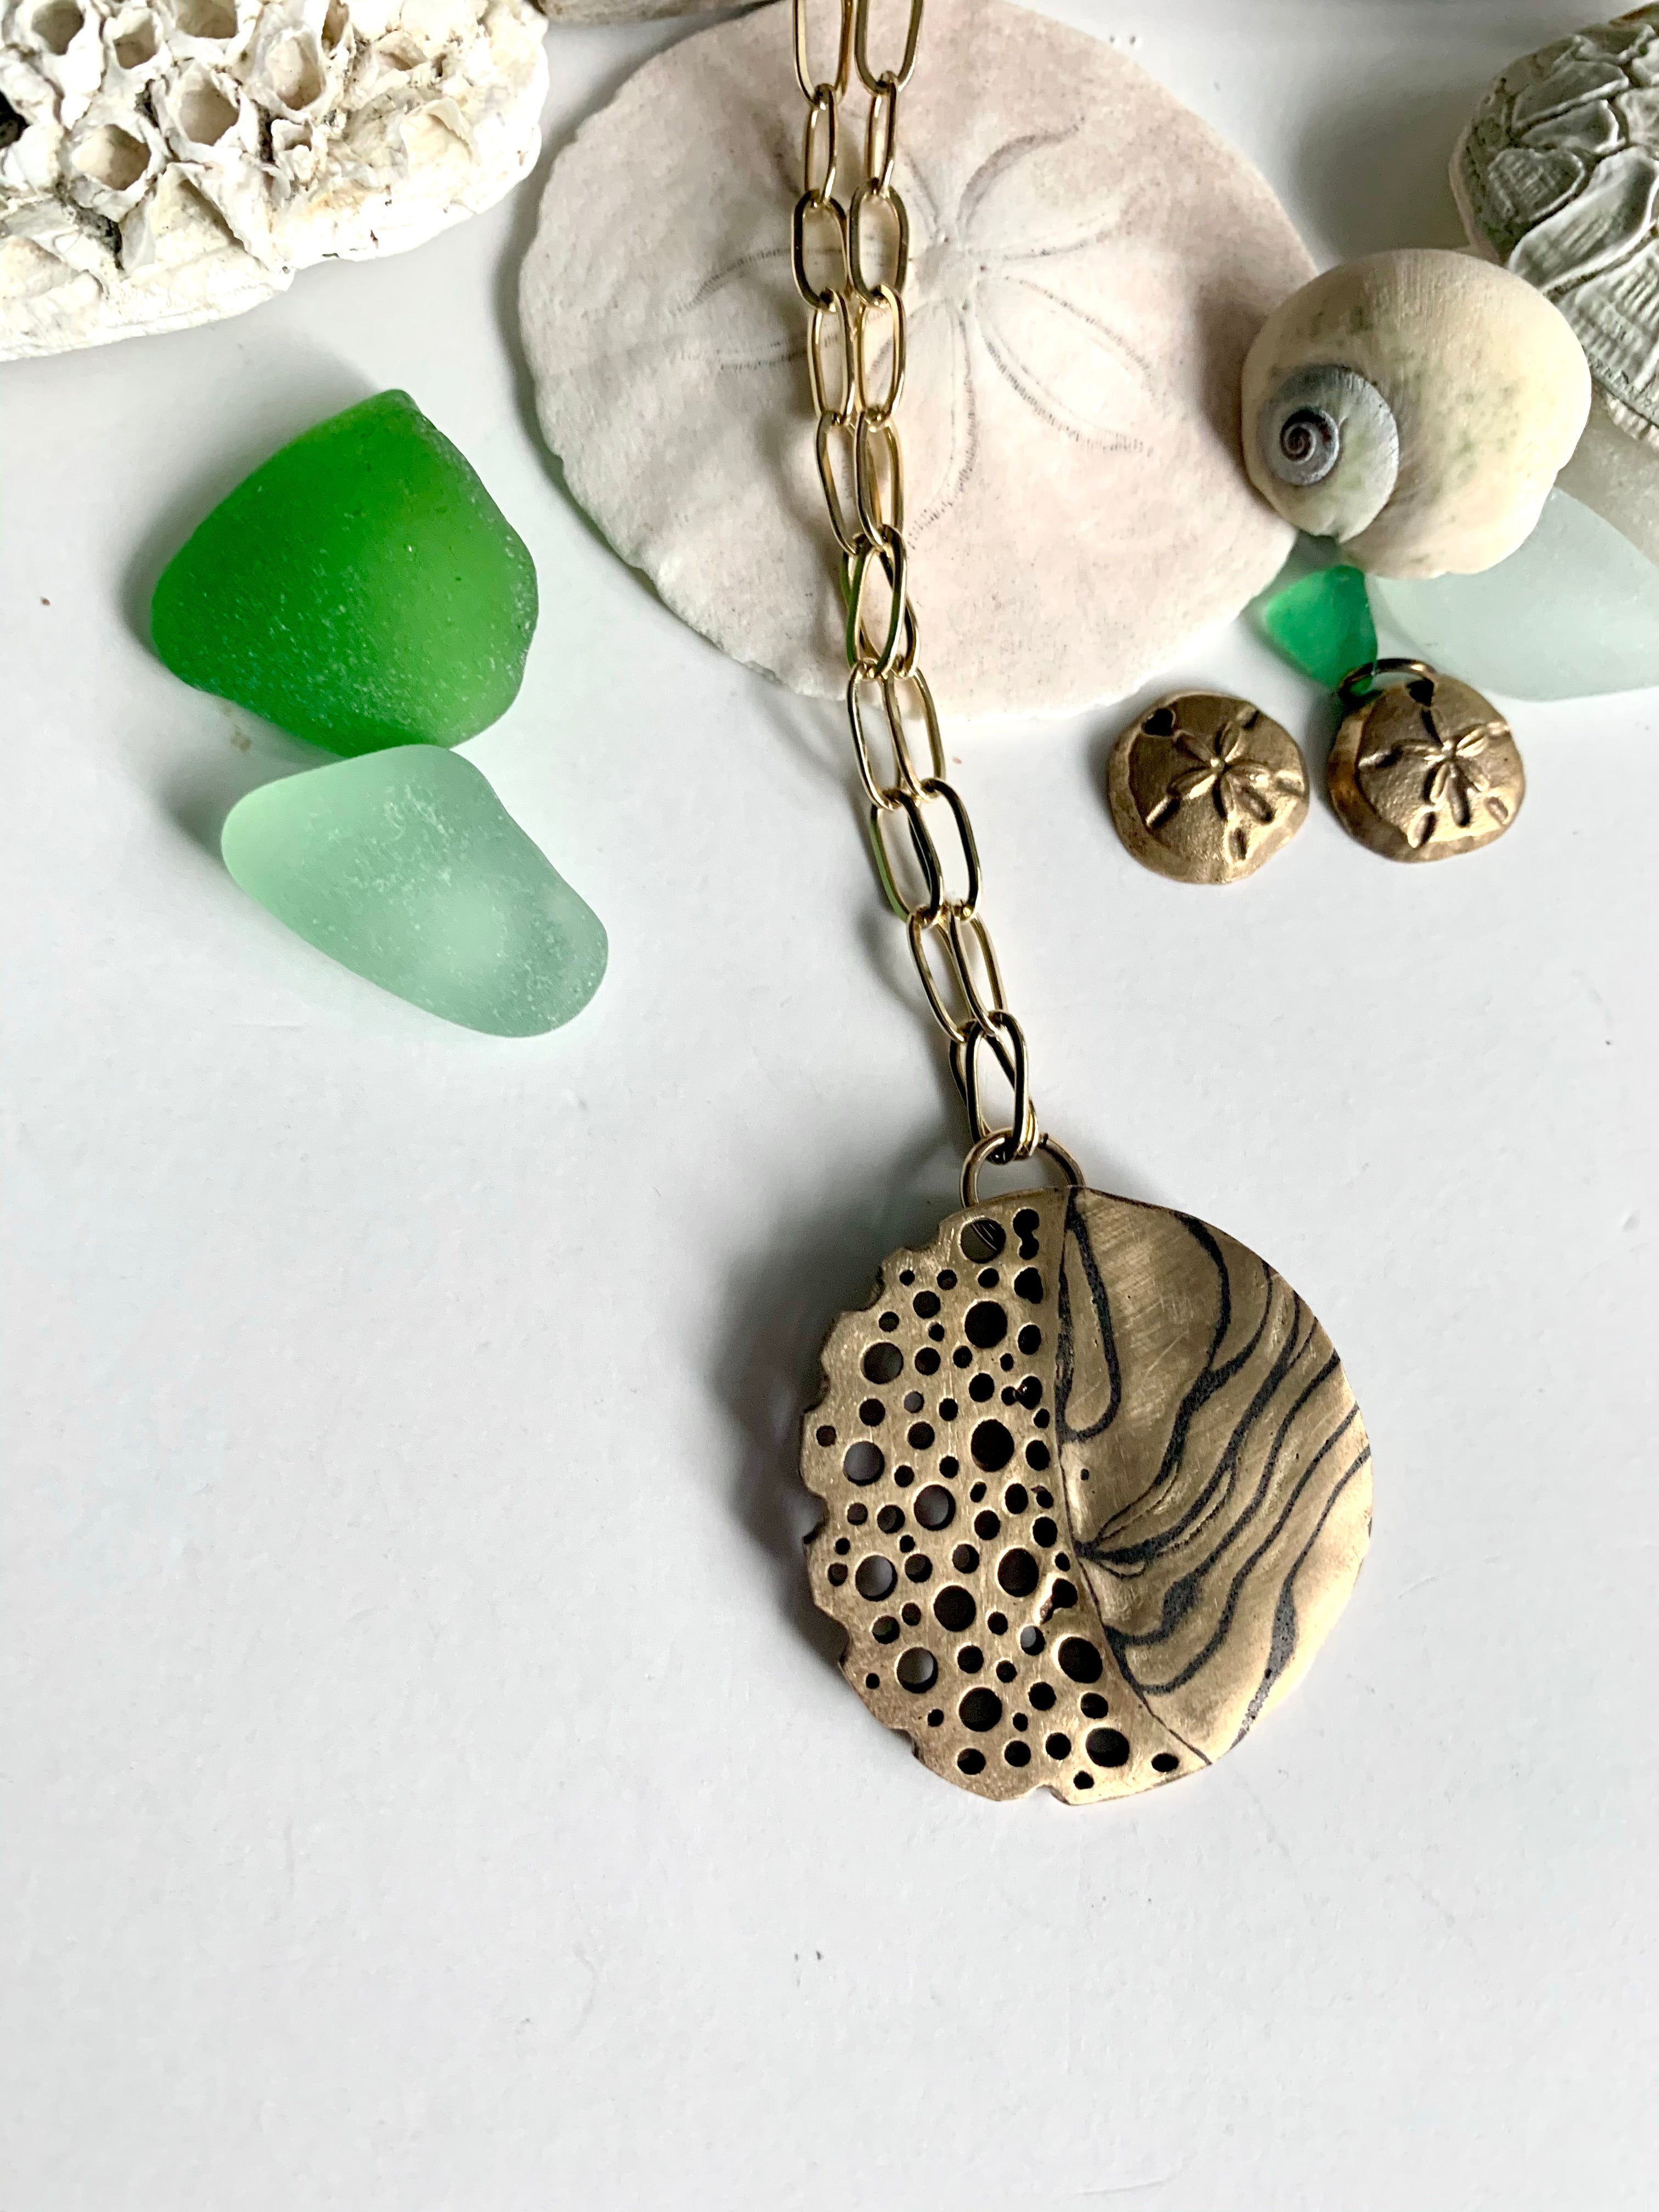 Ocean inspired hand crafted necklace with shells and green sea glass